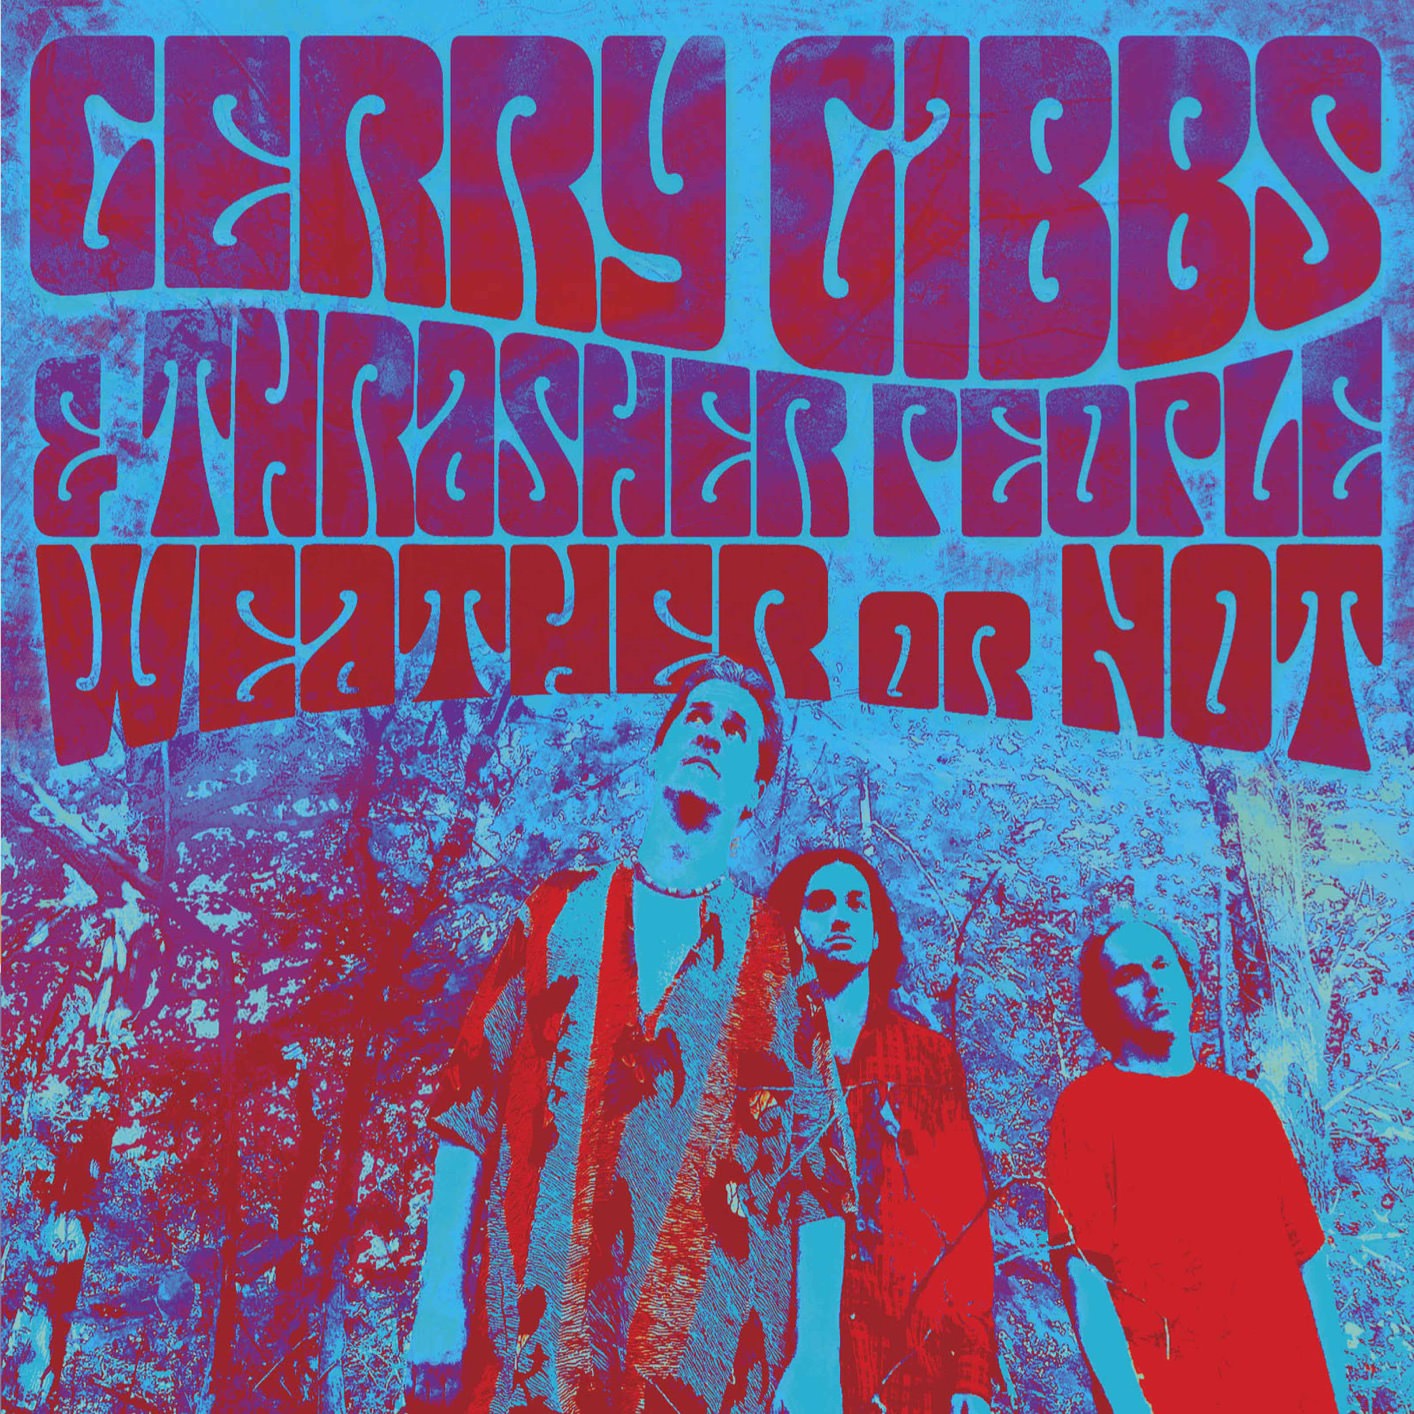 Gerry Gibbs & Thrasher People – Weather Or Not (2017) [HDTracks FLAC 24bit/96kHz]